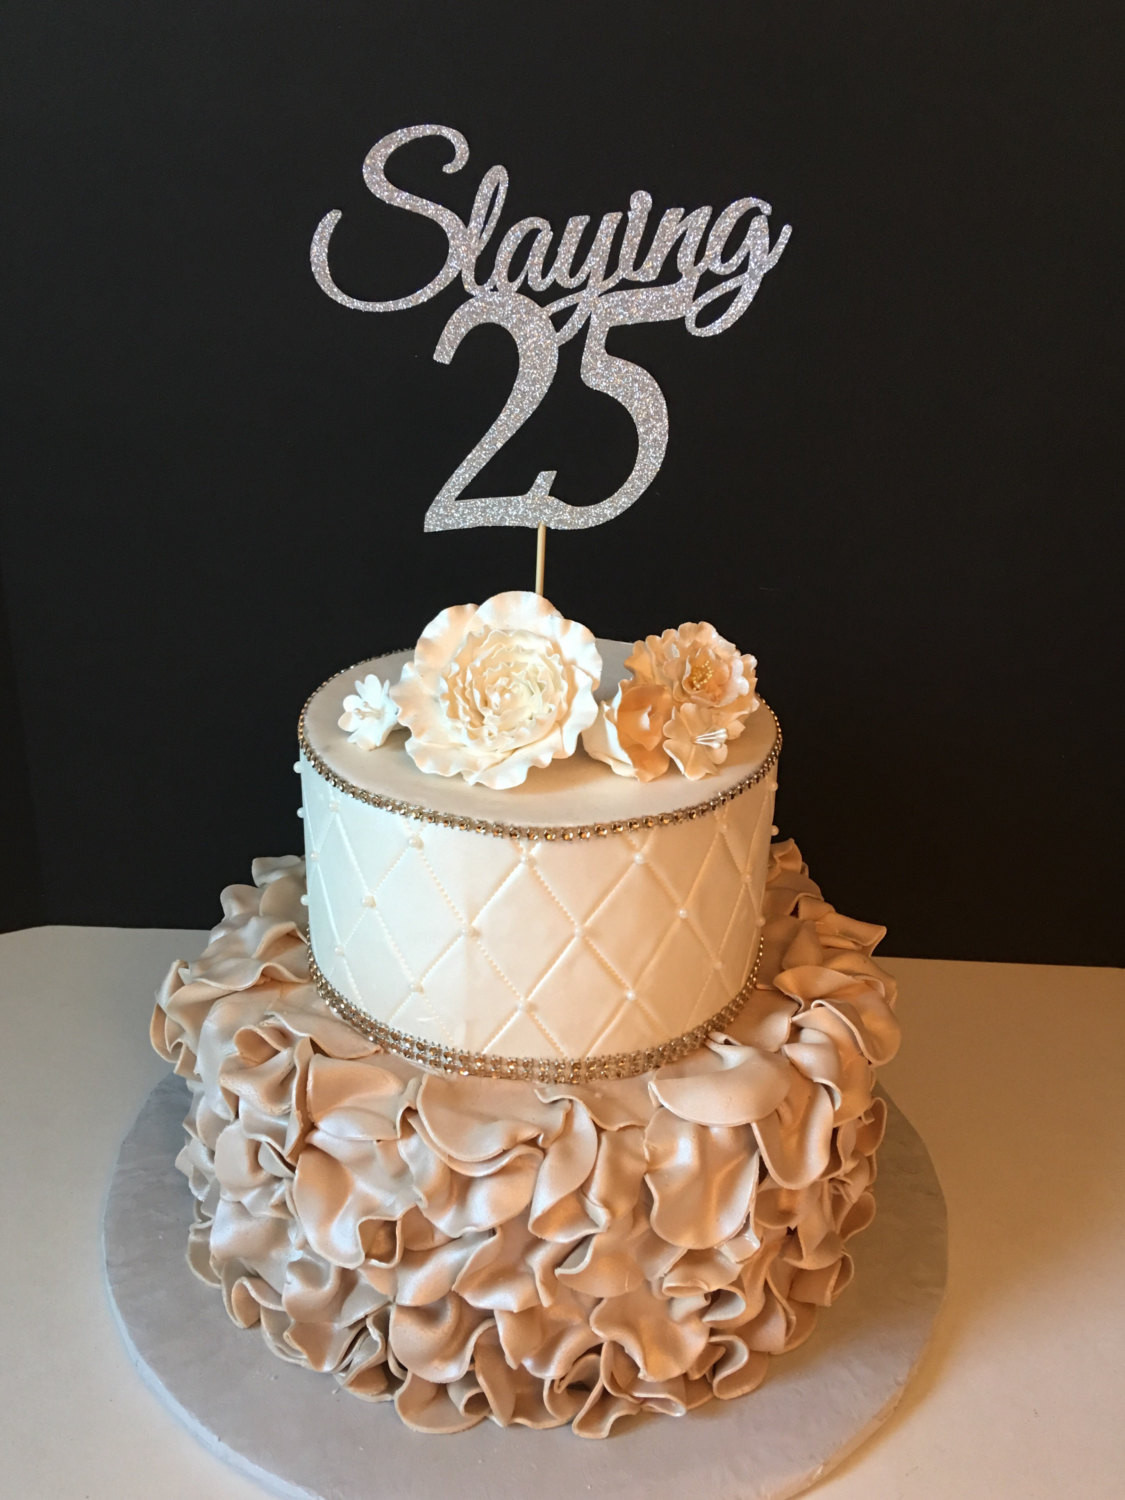 25th Birthday Cakes
 ANY NUMBER Gold Glitter 25th Birthday Cake Topper Slaying 25